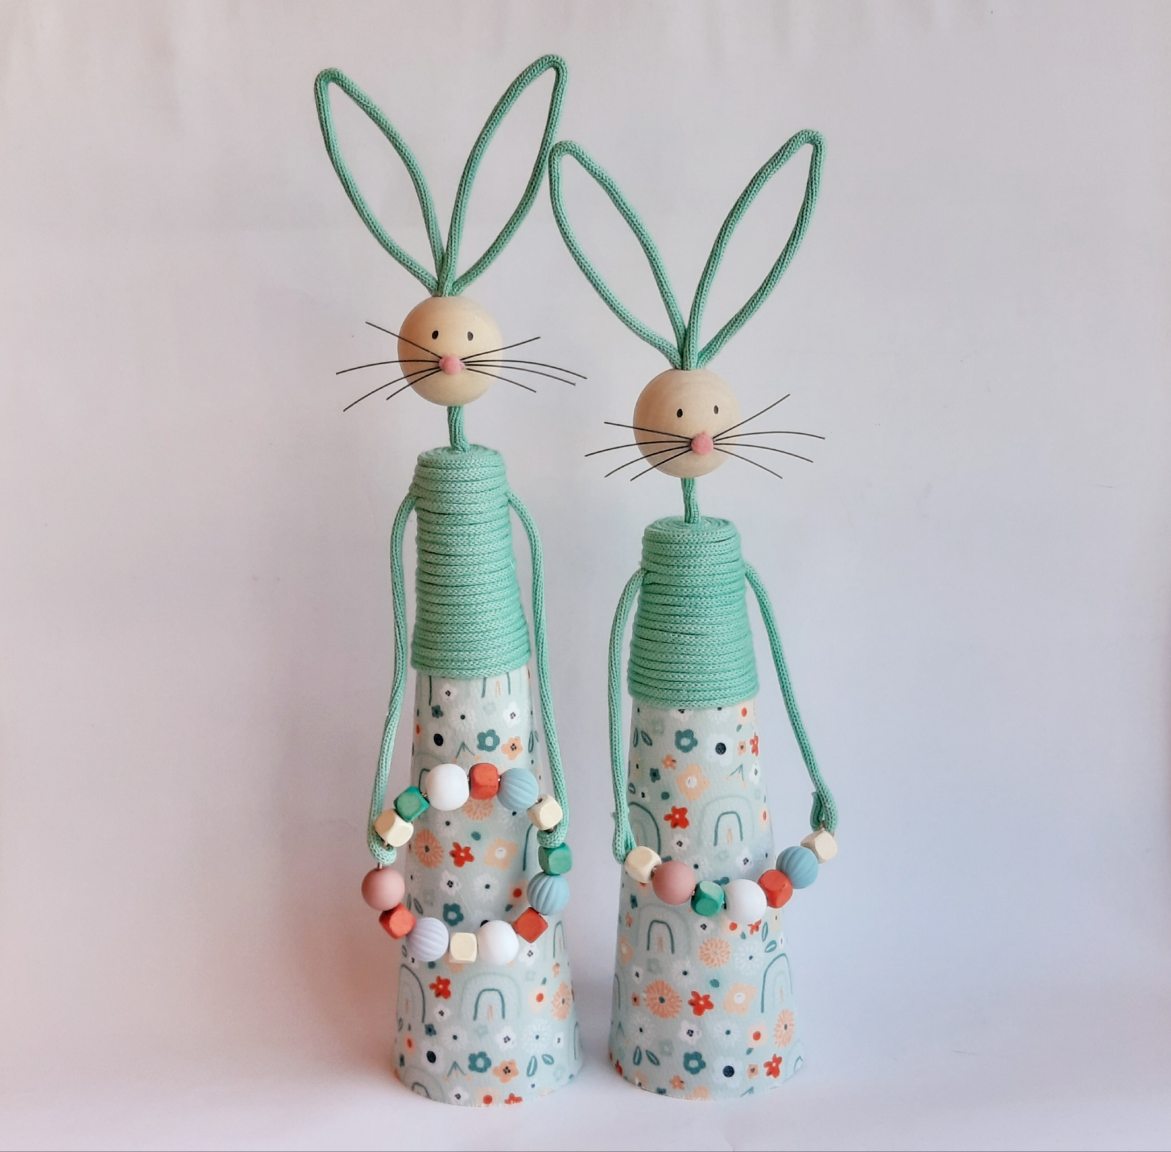 Two turquoise bunnies